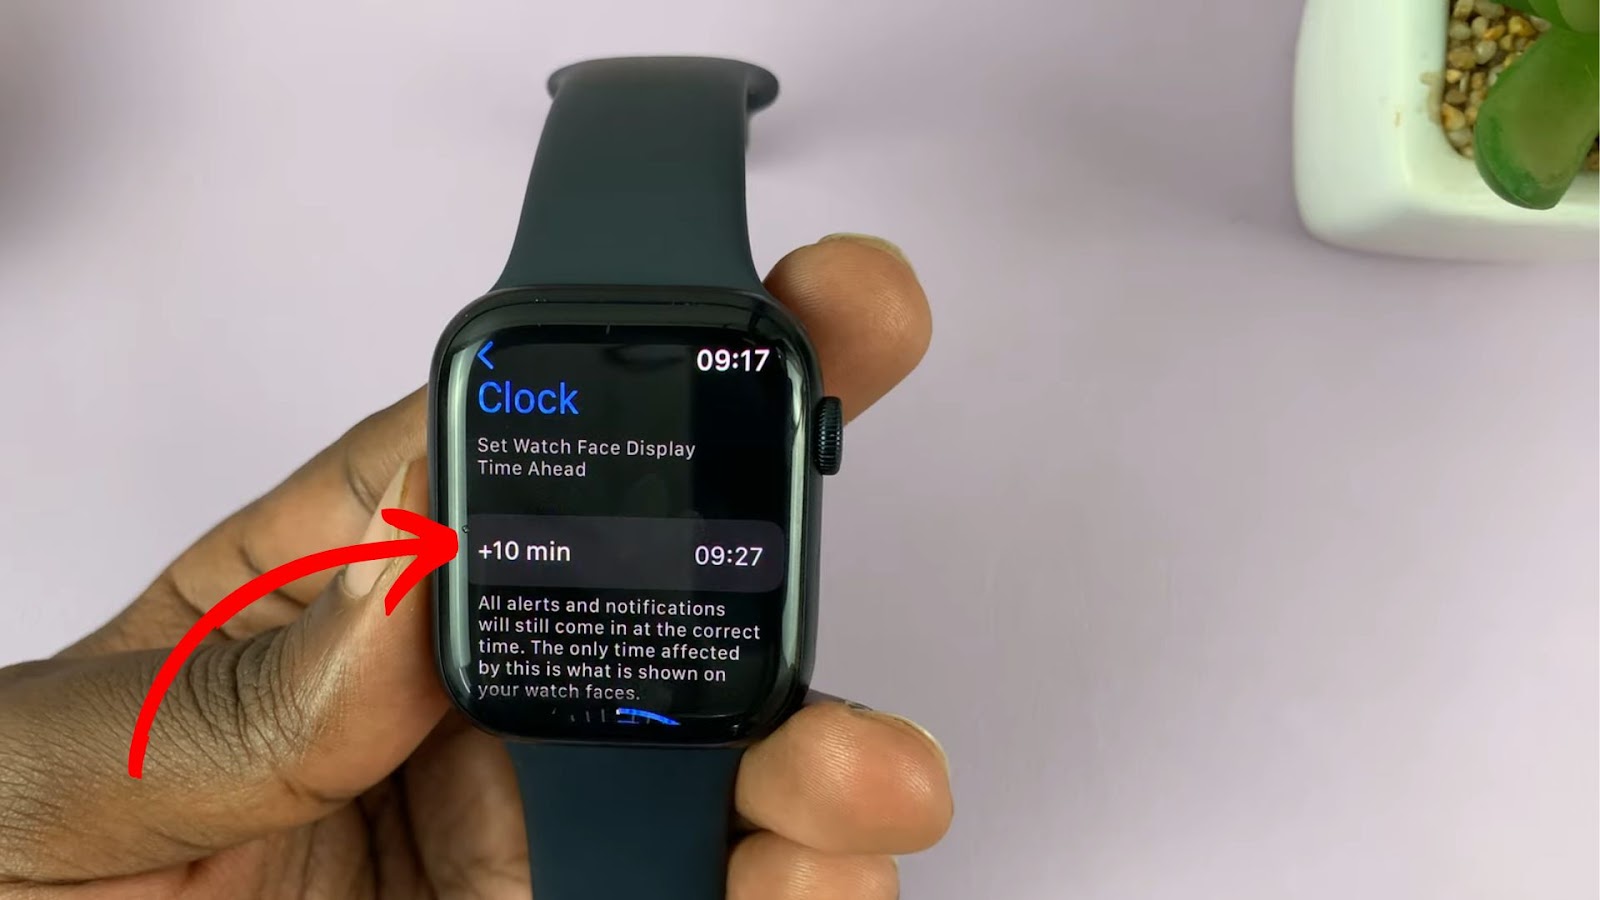 Set the + Number to Zero on the Apple Watch